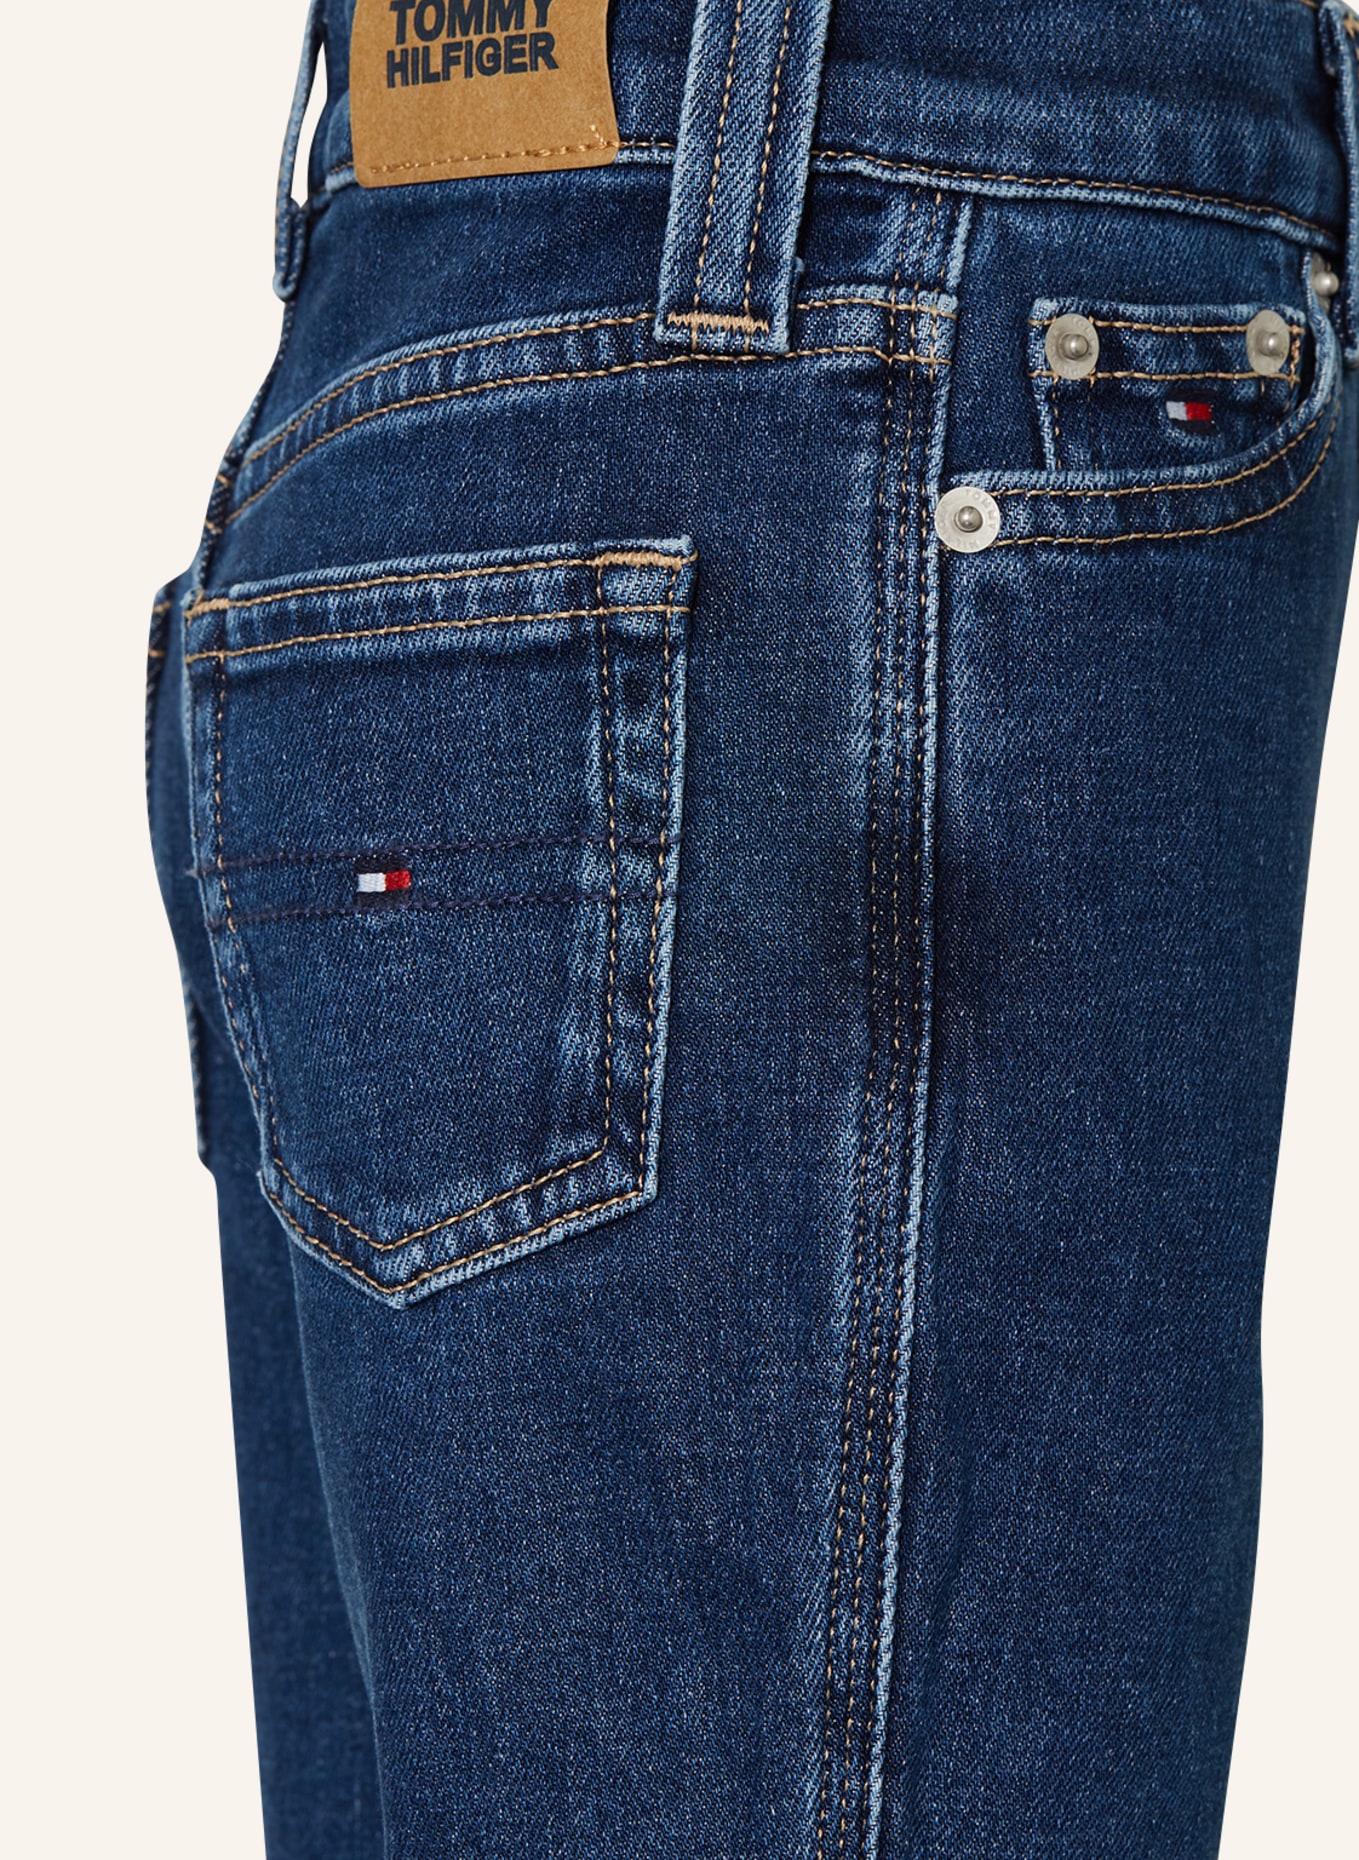 TOMMY HILFIGER Jeans MABEL, Farbe: 1BJ Midblueclean (Bild 3)